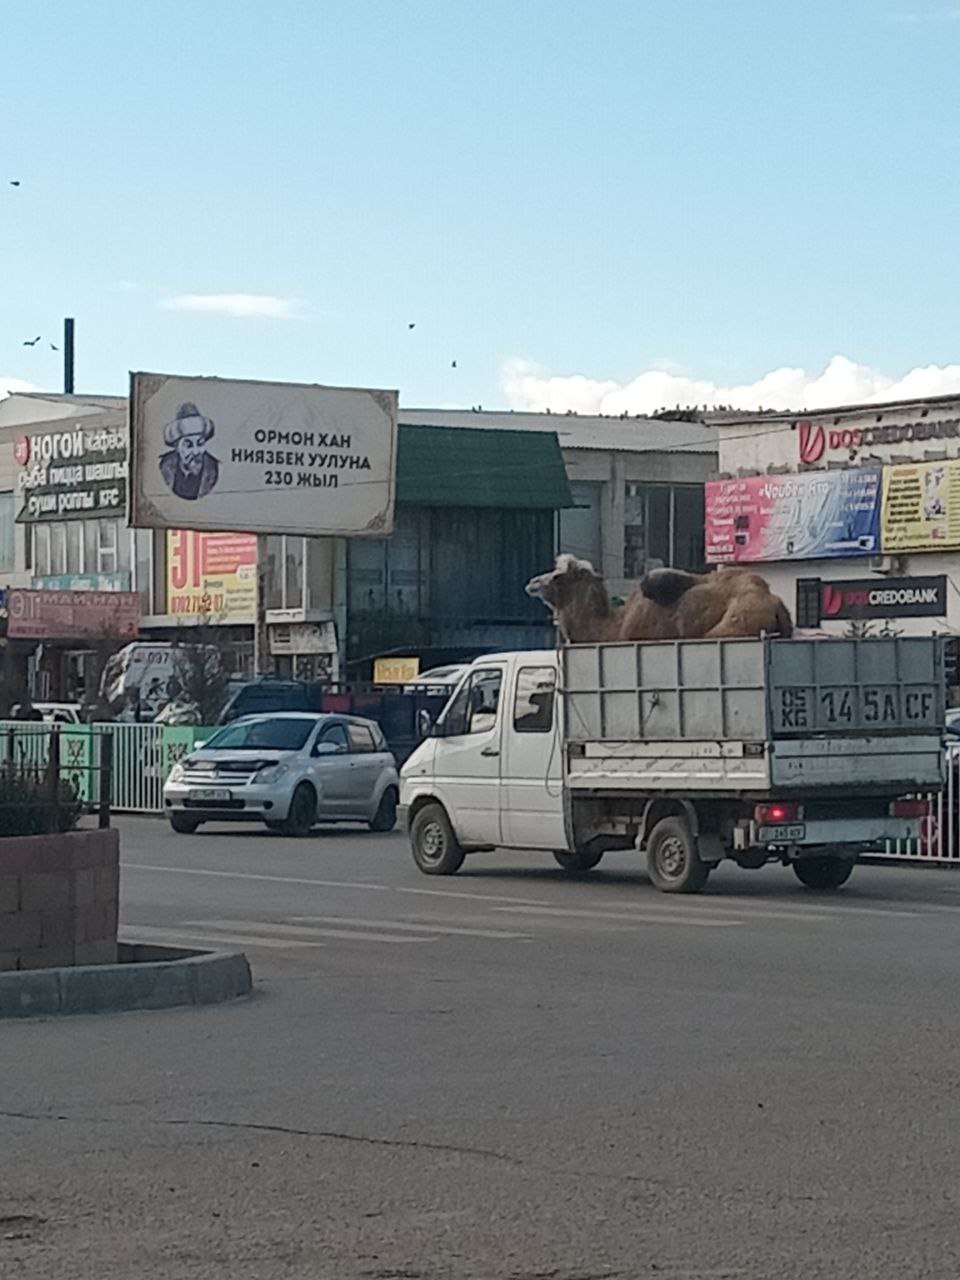 small transporting truck for livestock on the road in a town with a camel visible standing in the truck bed